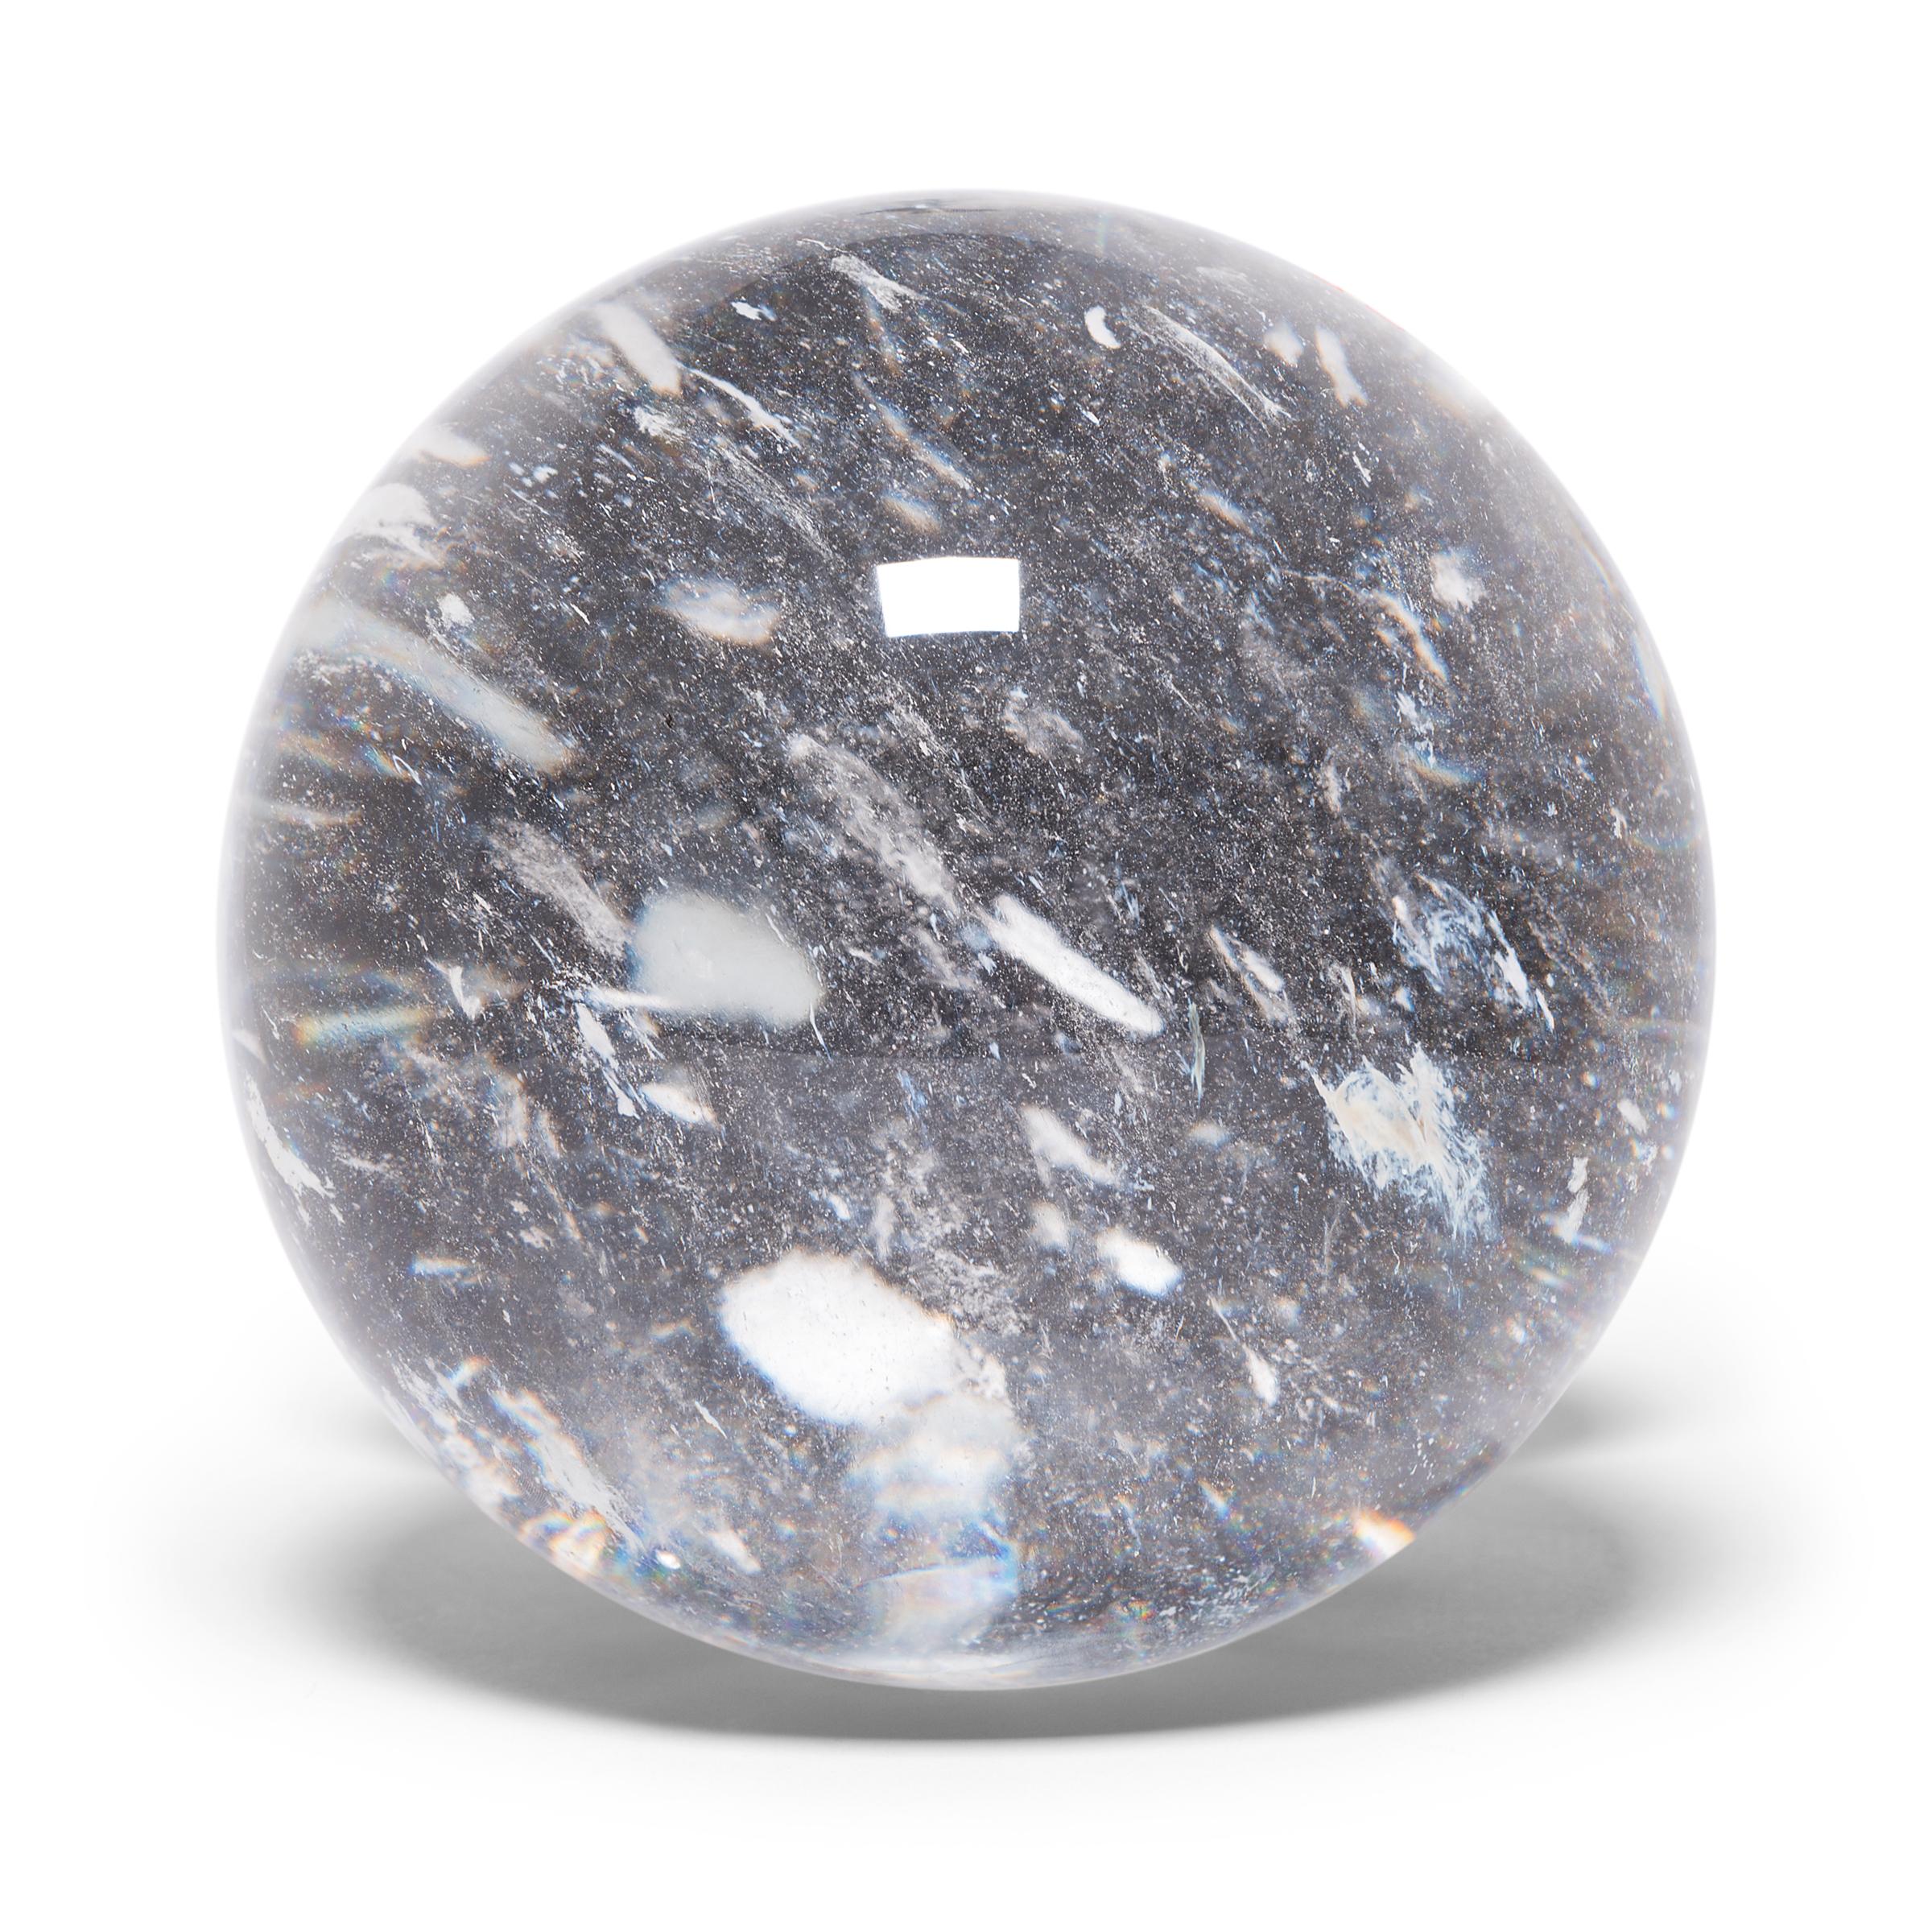 Gem lore is endless, and every culture has its own beliefs about specific stones tied to cultural history, geography, and spiritual practices. In China, some practitioners of feng shui value clear quartz, like this beautiful crystal ball, for its